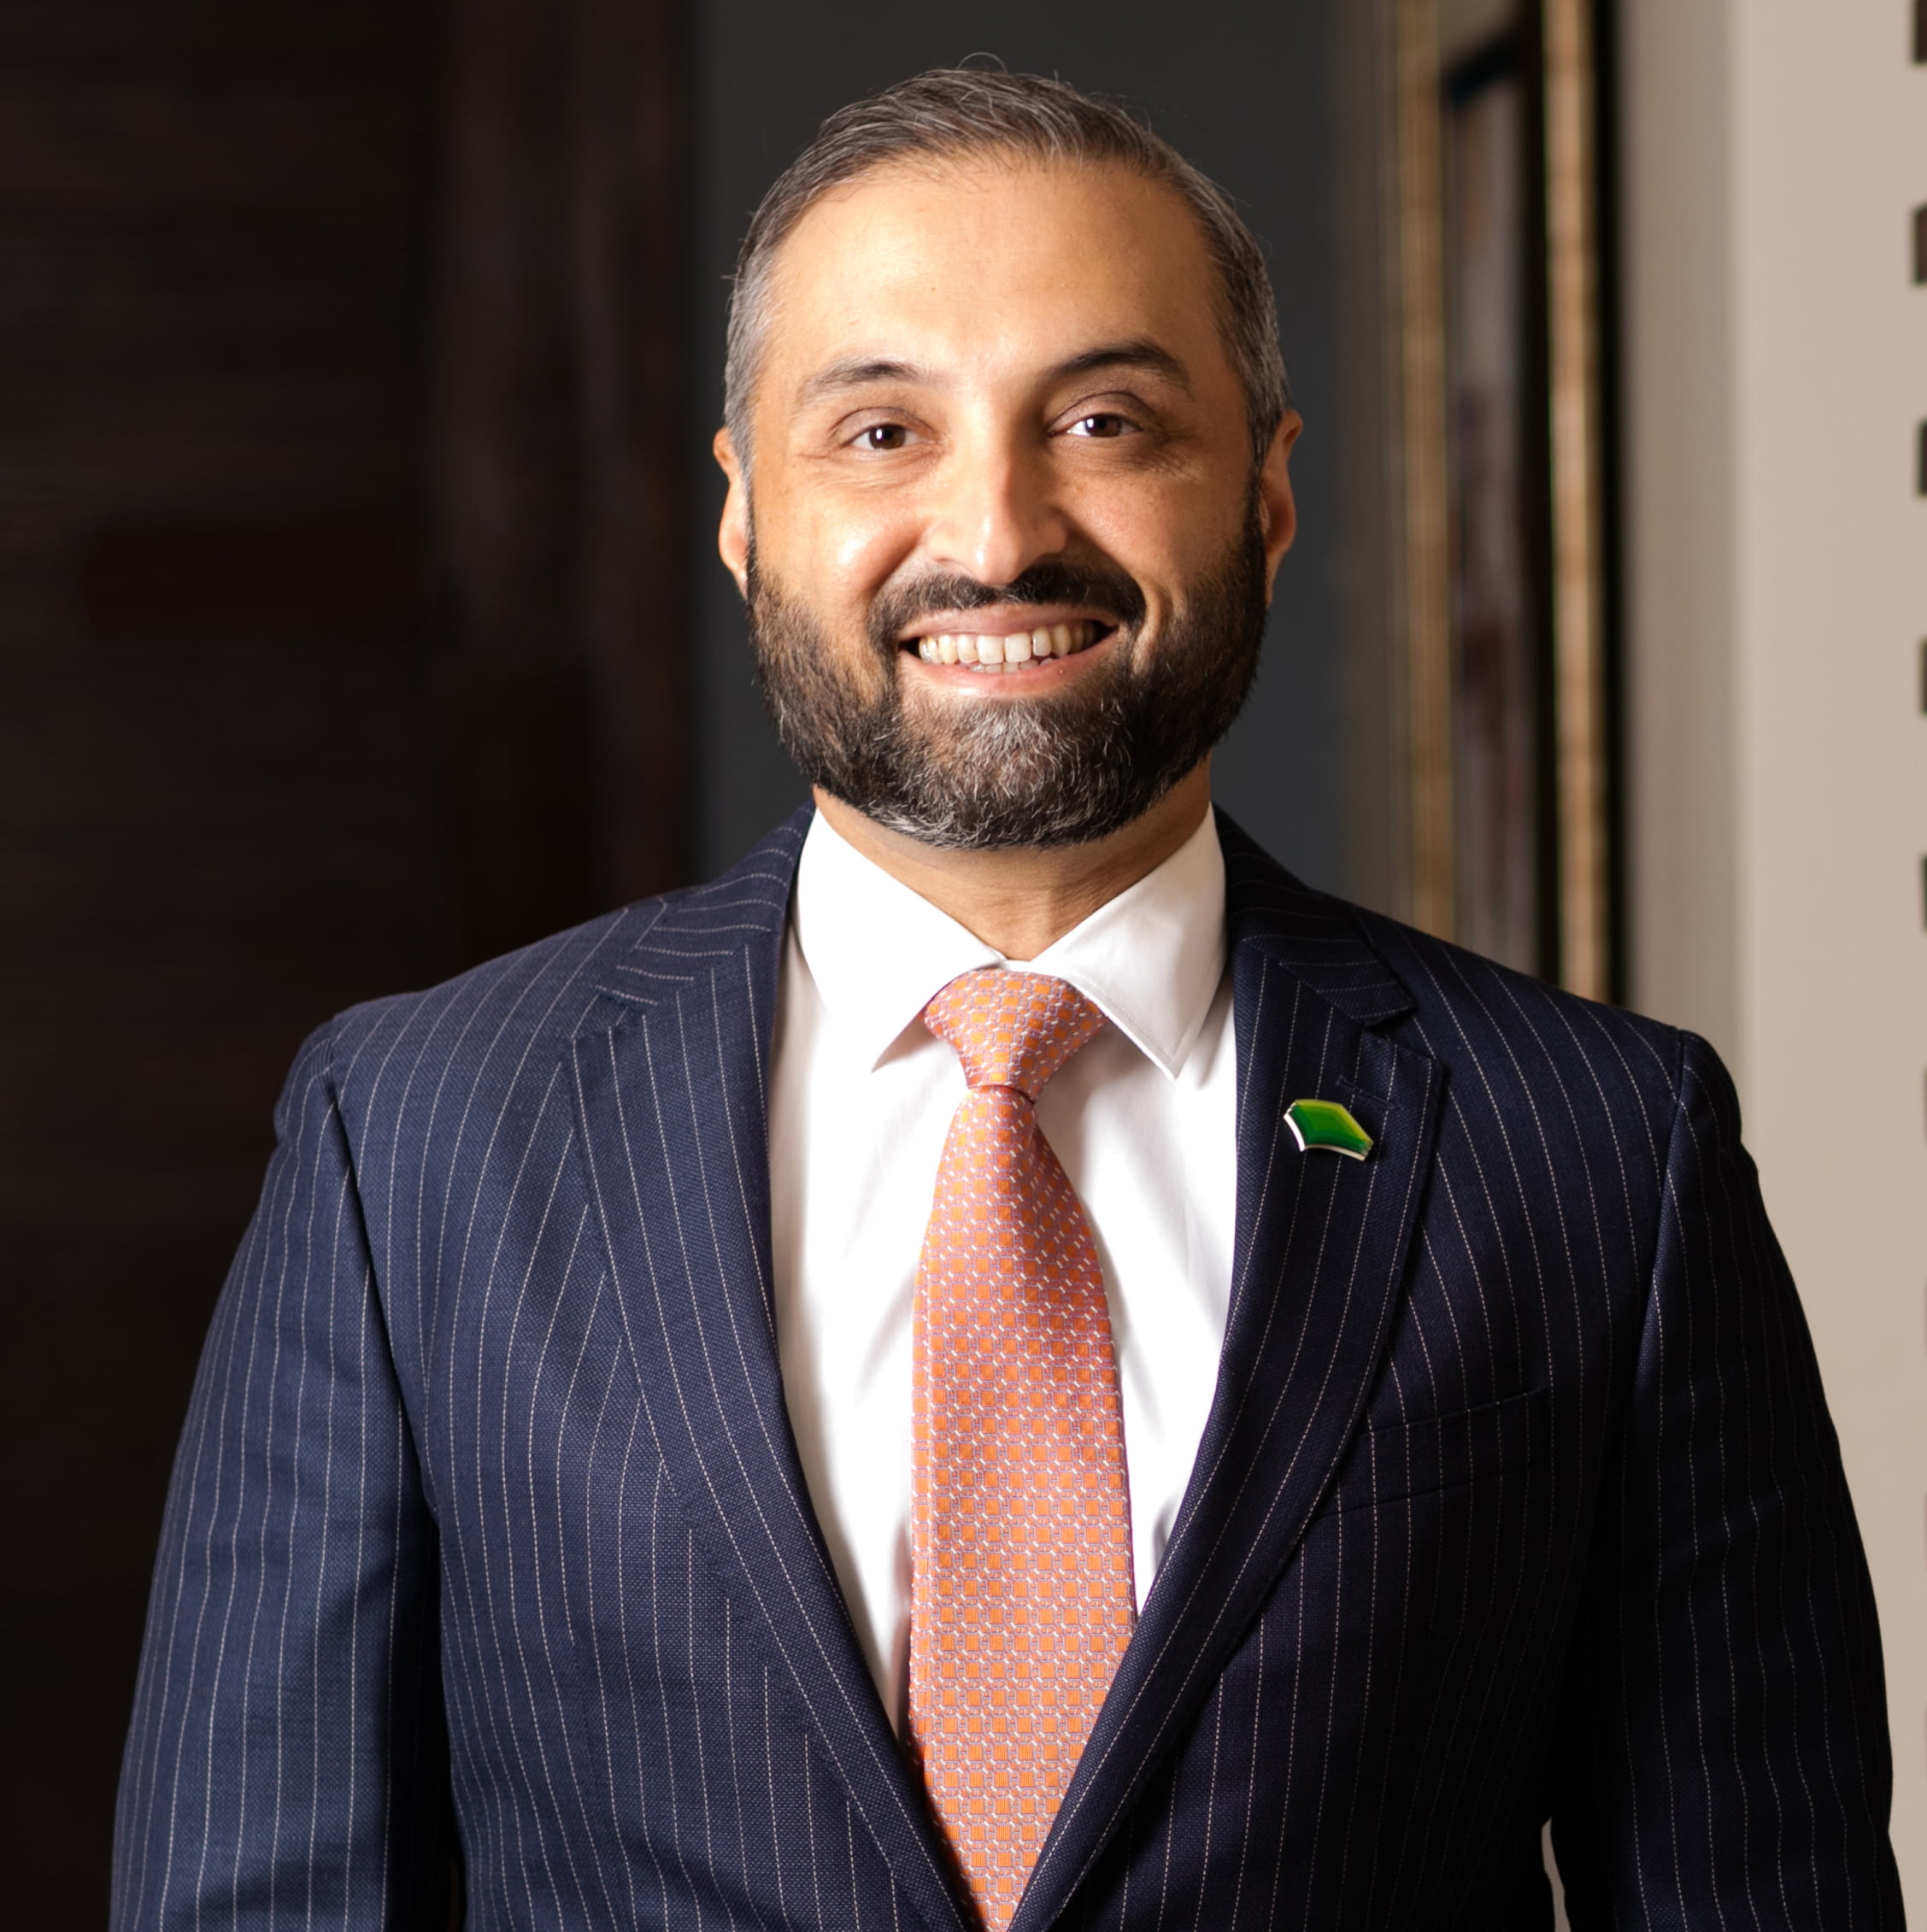 Ghias Khan elected President of OICCI – the largest business Chamber in Pakistan based on economic contribution